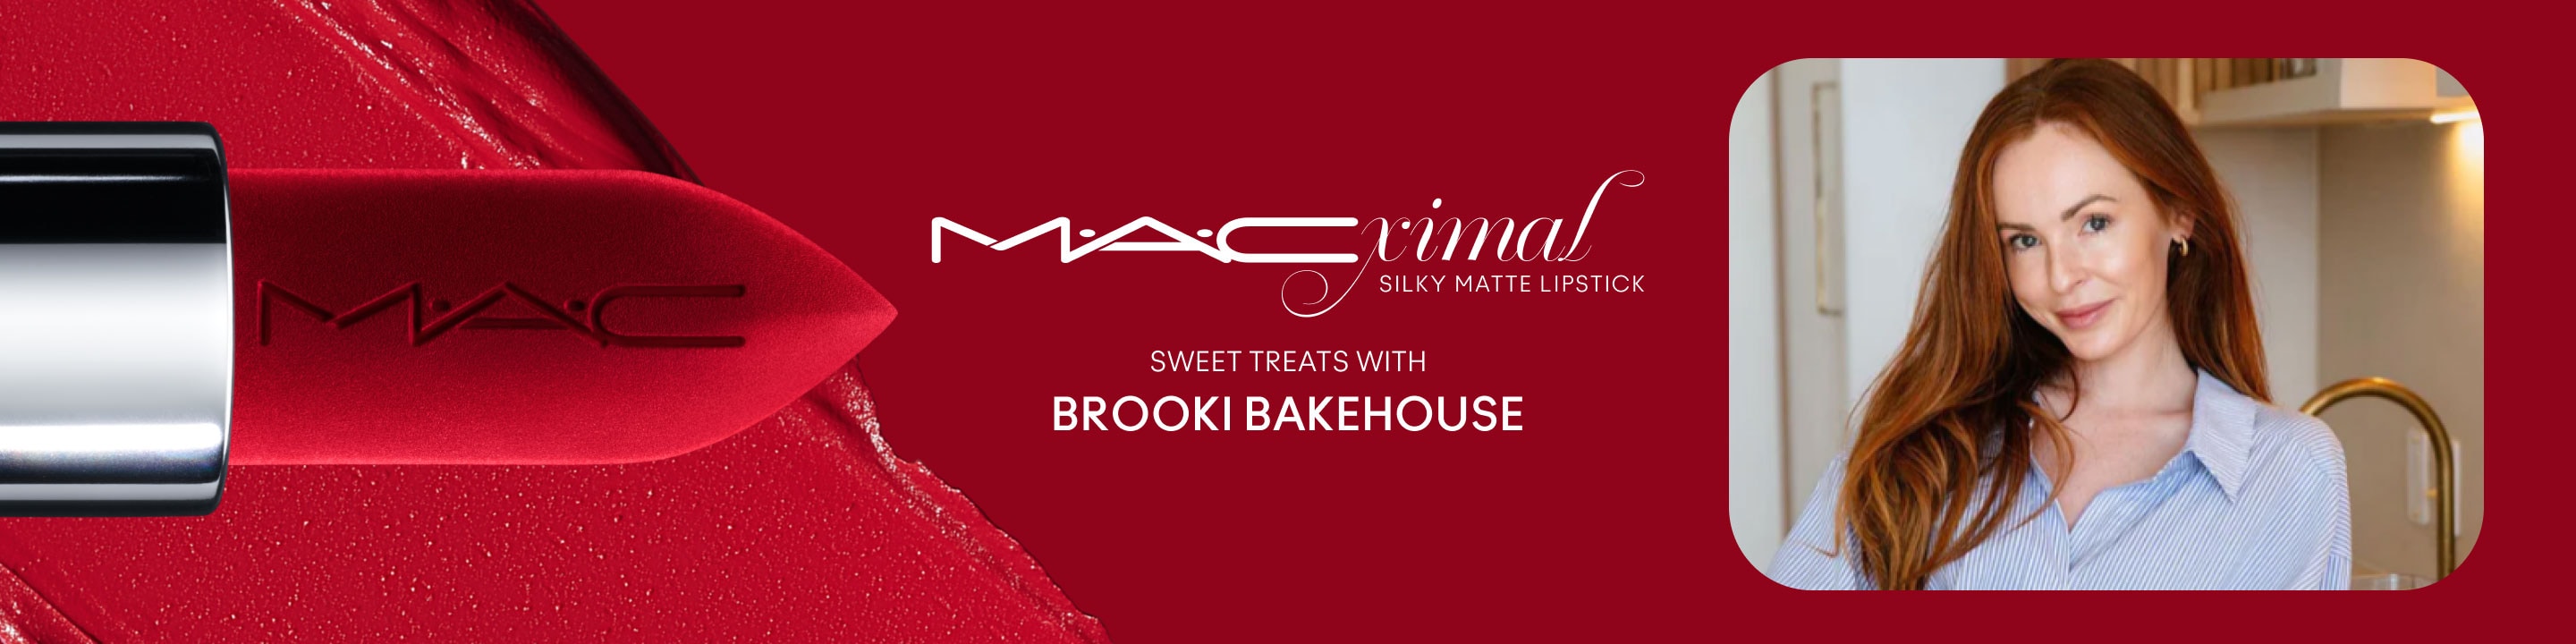 WIN A $500 M.A.C GIFT CARD AND A PRIZE PACK OF BROOKI BAKEHOUSE COOKIES